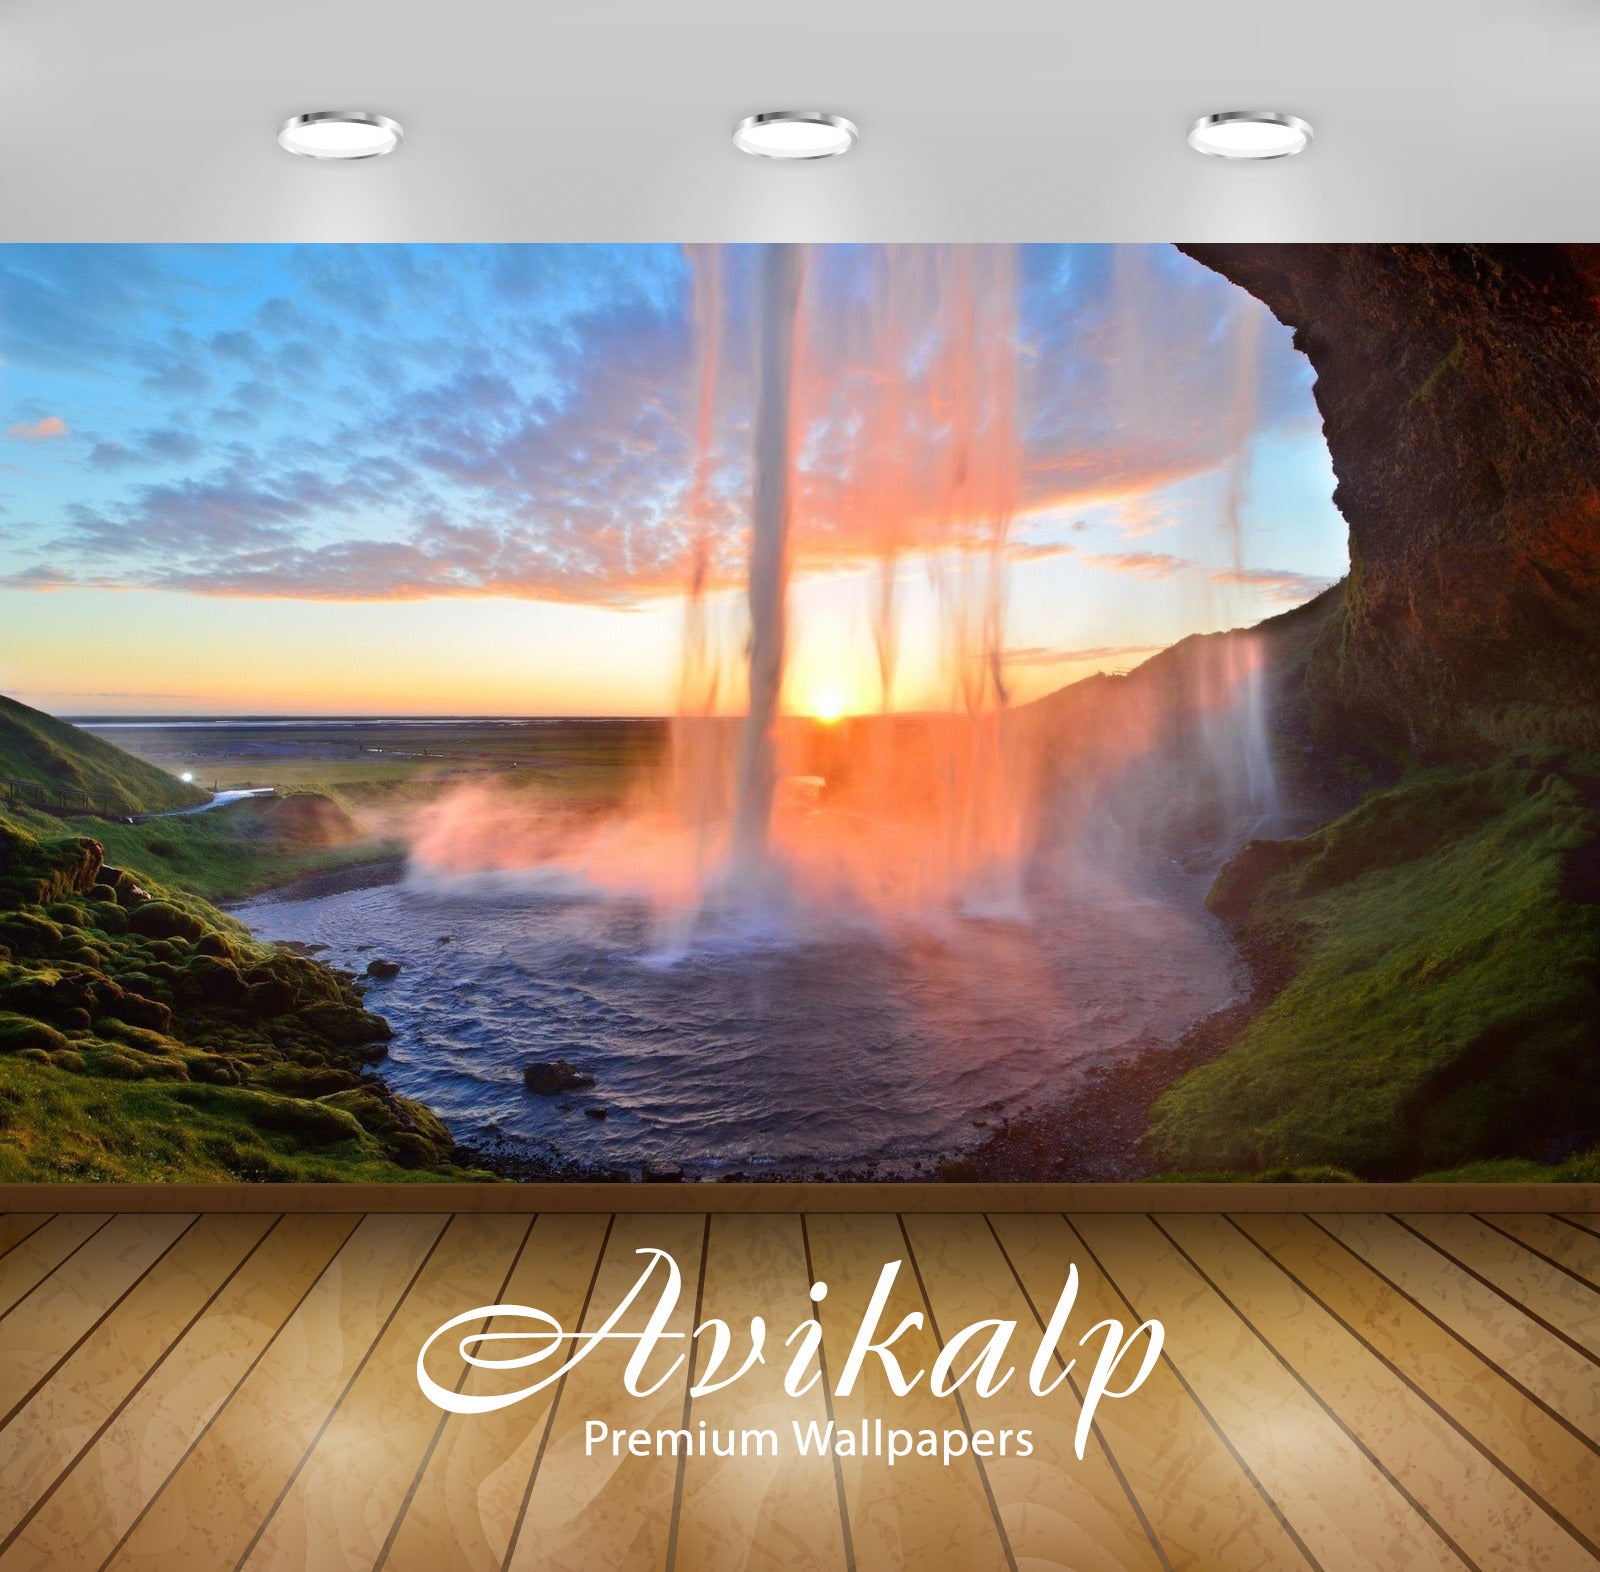 Avikalp Exclusive Awi1818 Beautiful Waterfall In Sunset Full HD Wallpapers for Living room, Hall, Ki